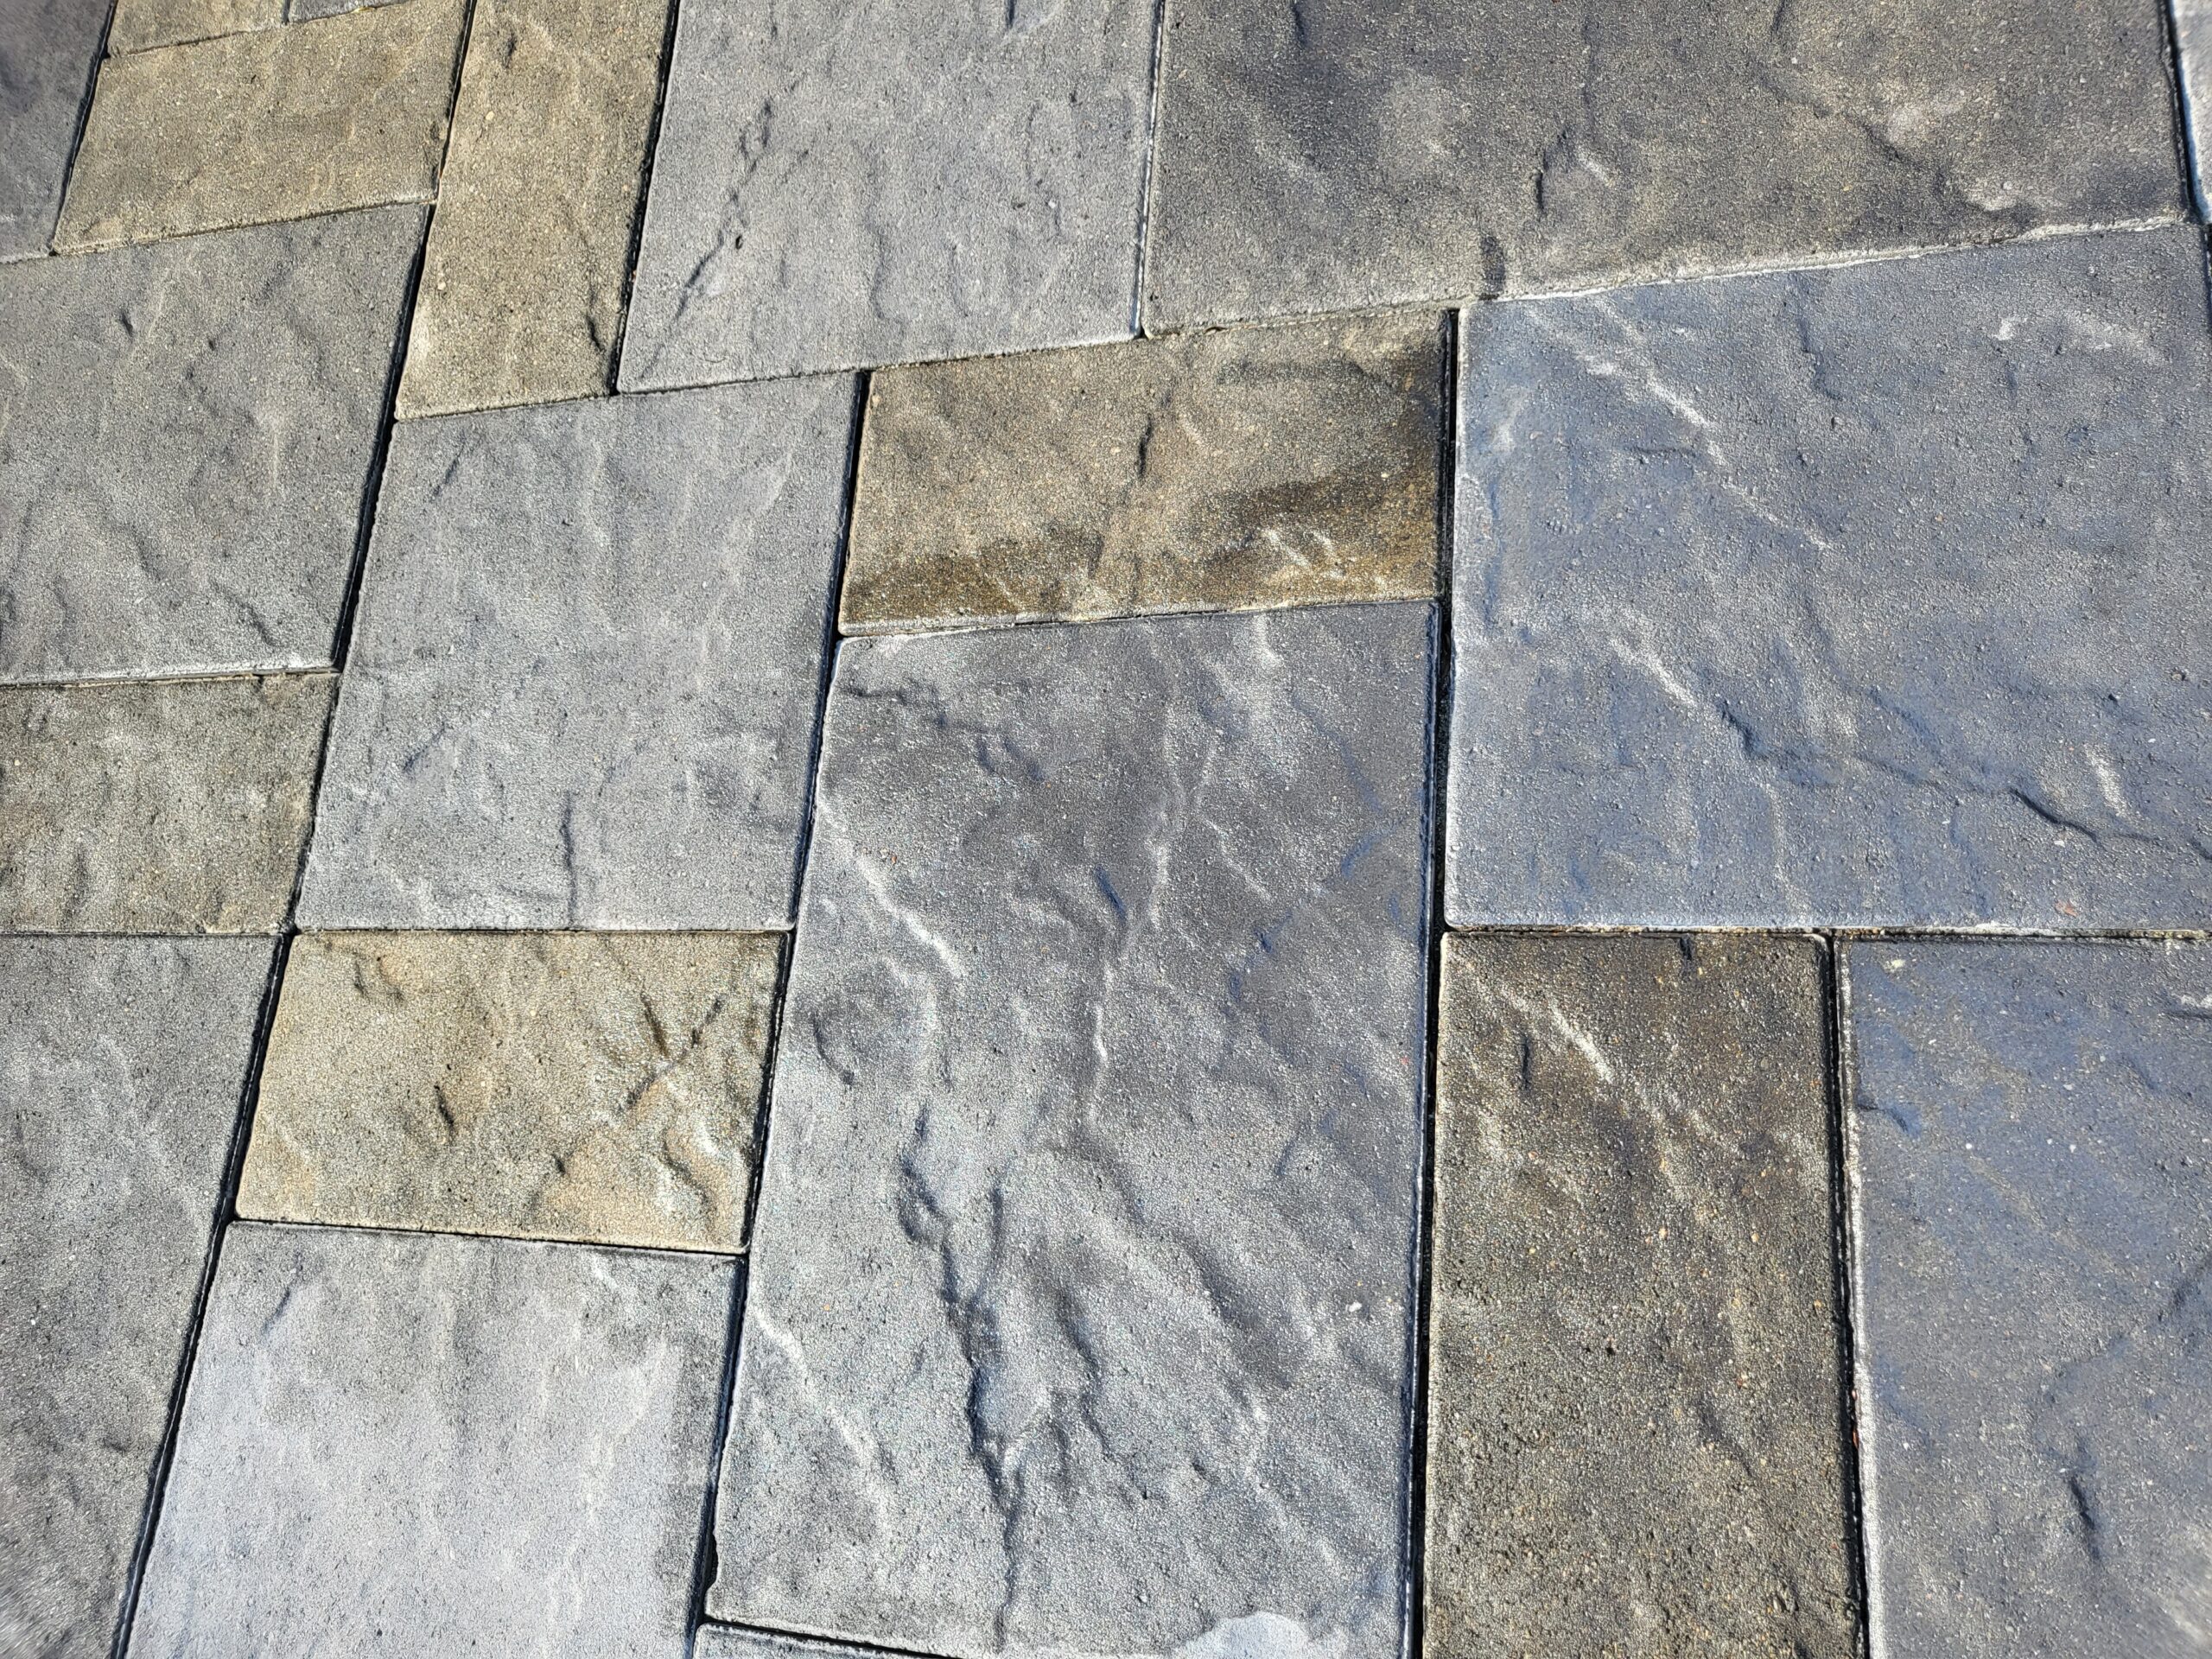 Close-up image highlighting the intricate textures and the harmonious blend of Silver Gray, Light Charcoal, and Tweed Antiquing stains on the slate-stamped concrete patio